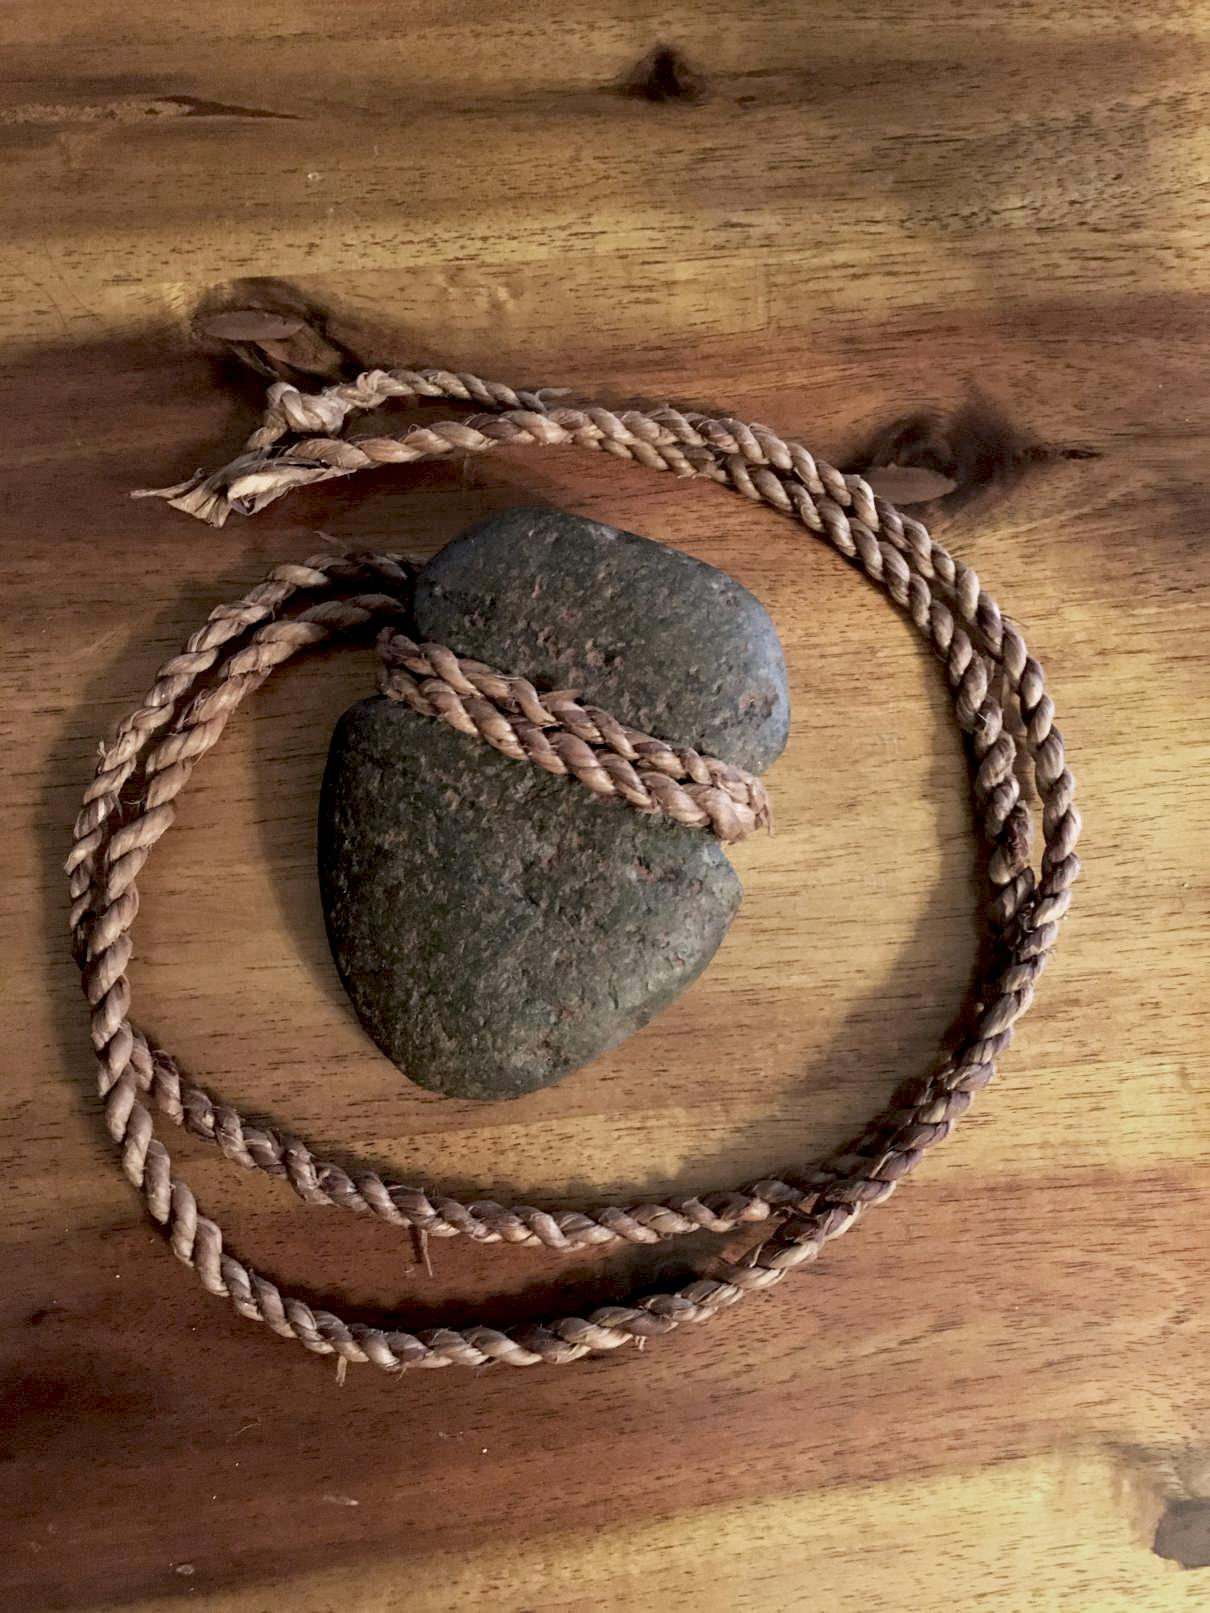 A carved stone wrapped with a rope displayed on a wooden surface.